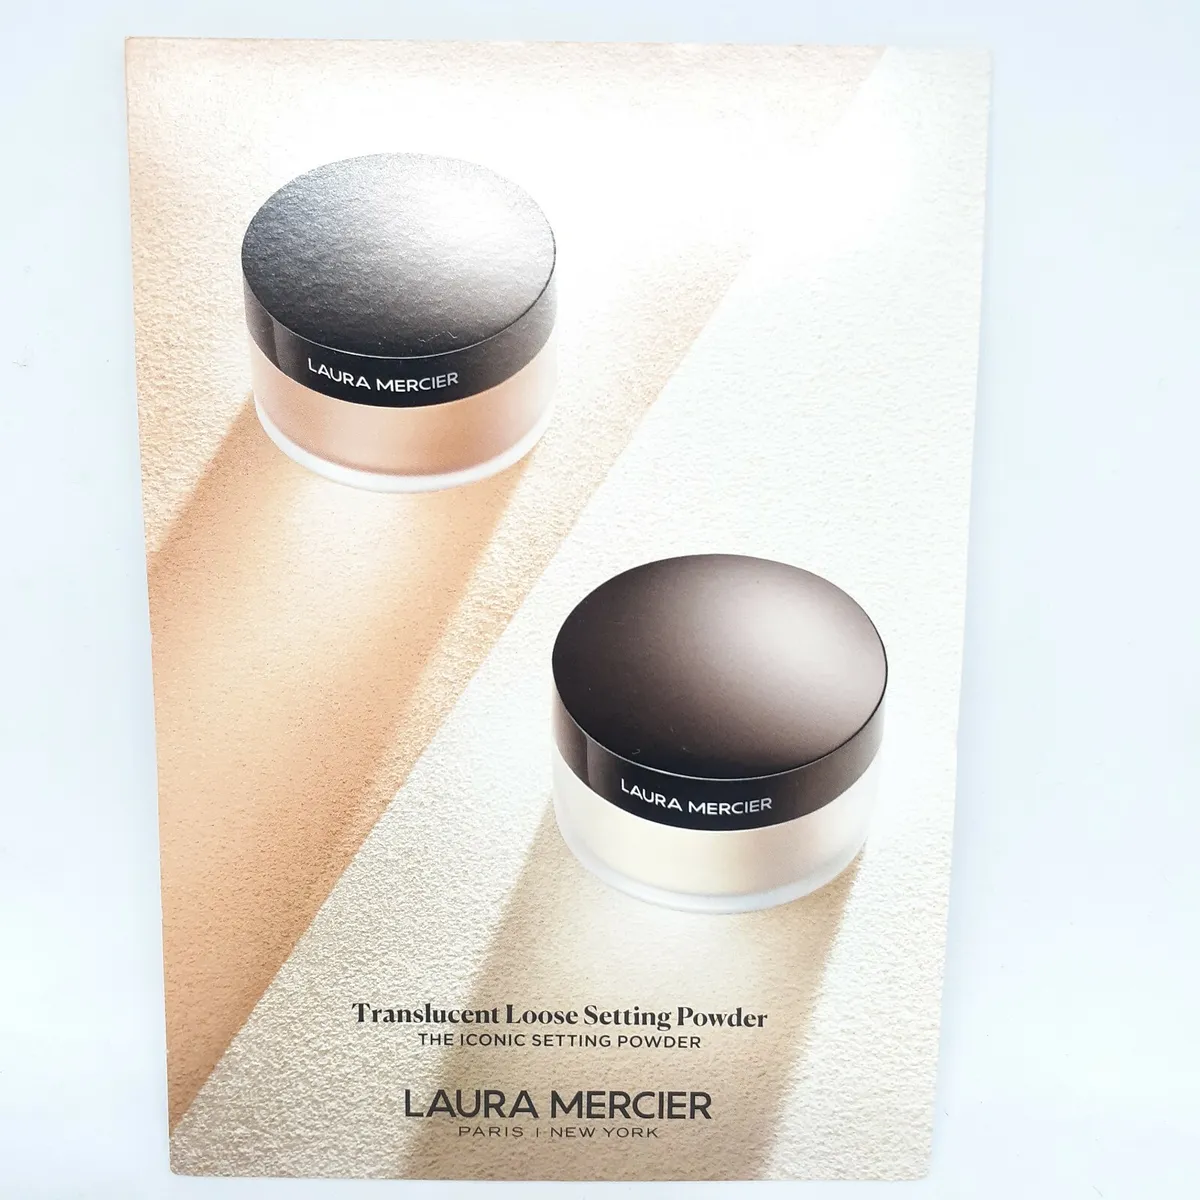 Laura Mercier Translucent Loose Setting Powder Glow Review & Swatches